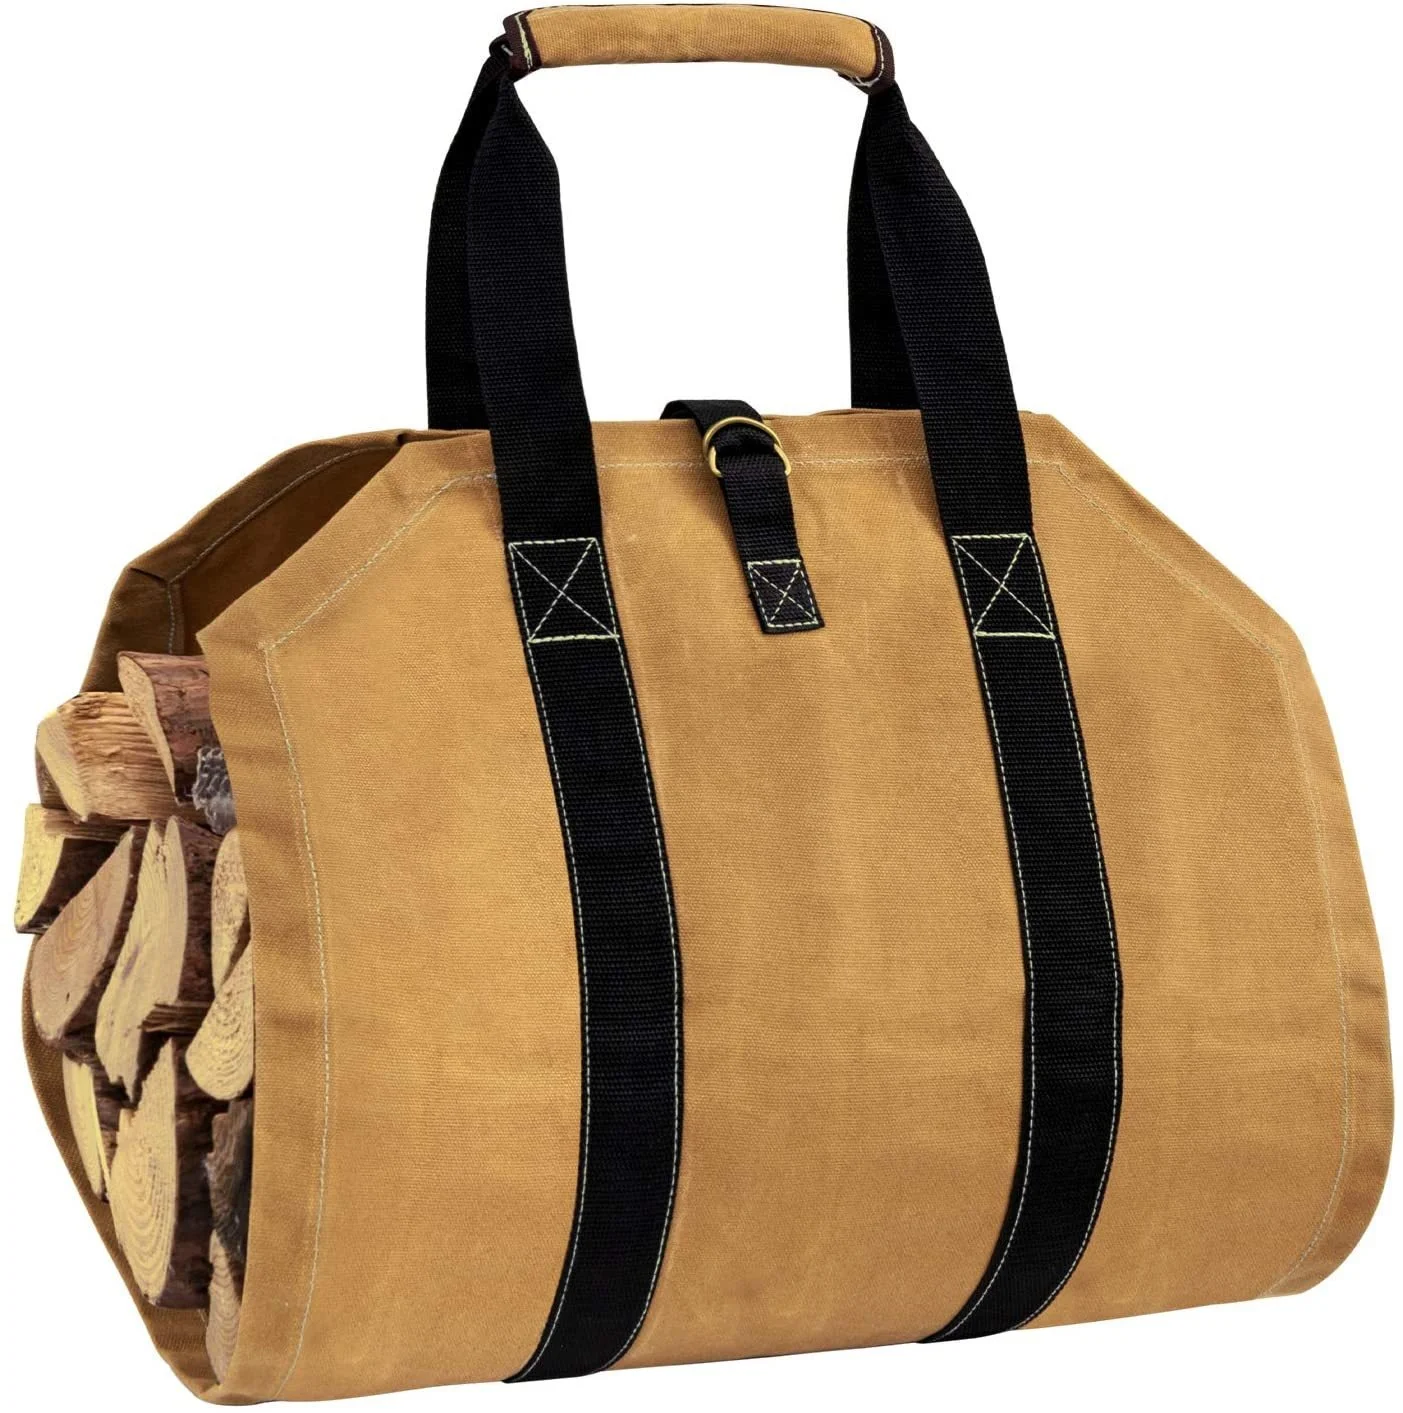 

Firewood Carrier with Handles Waxed Canvas Log Carrier Tote Canvas Wood Carrier for Firewood Best for Carrying Wood